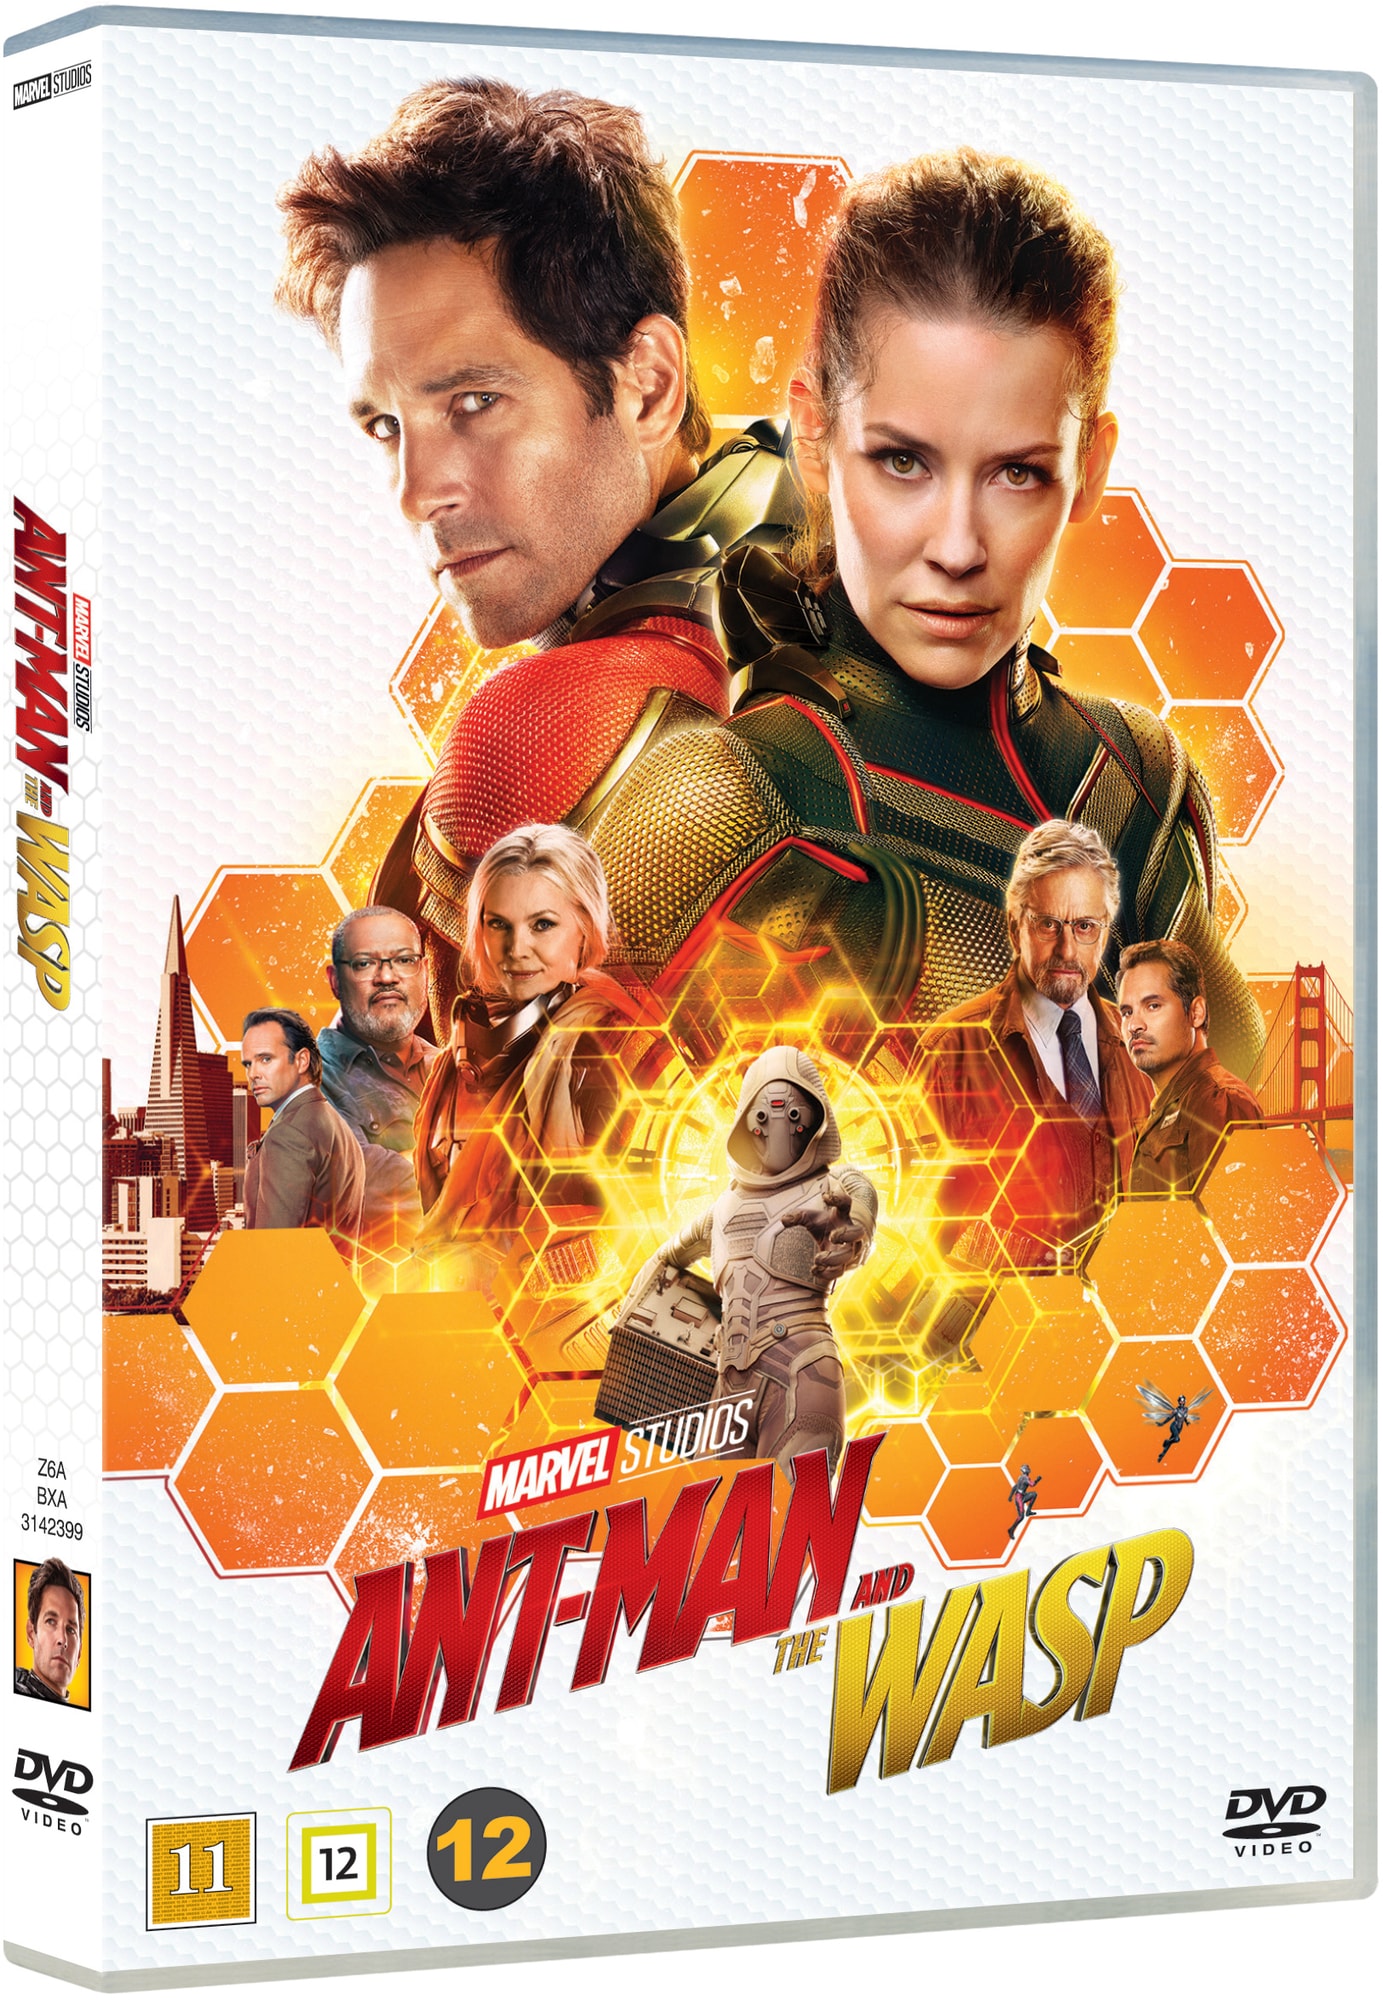 Ant-Man and the Wasp (DVD) - Elgiganten